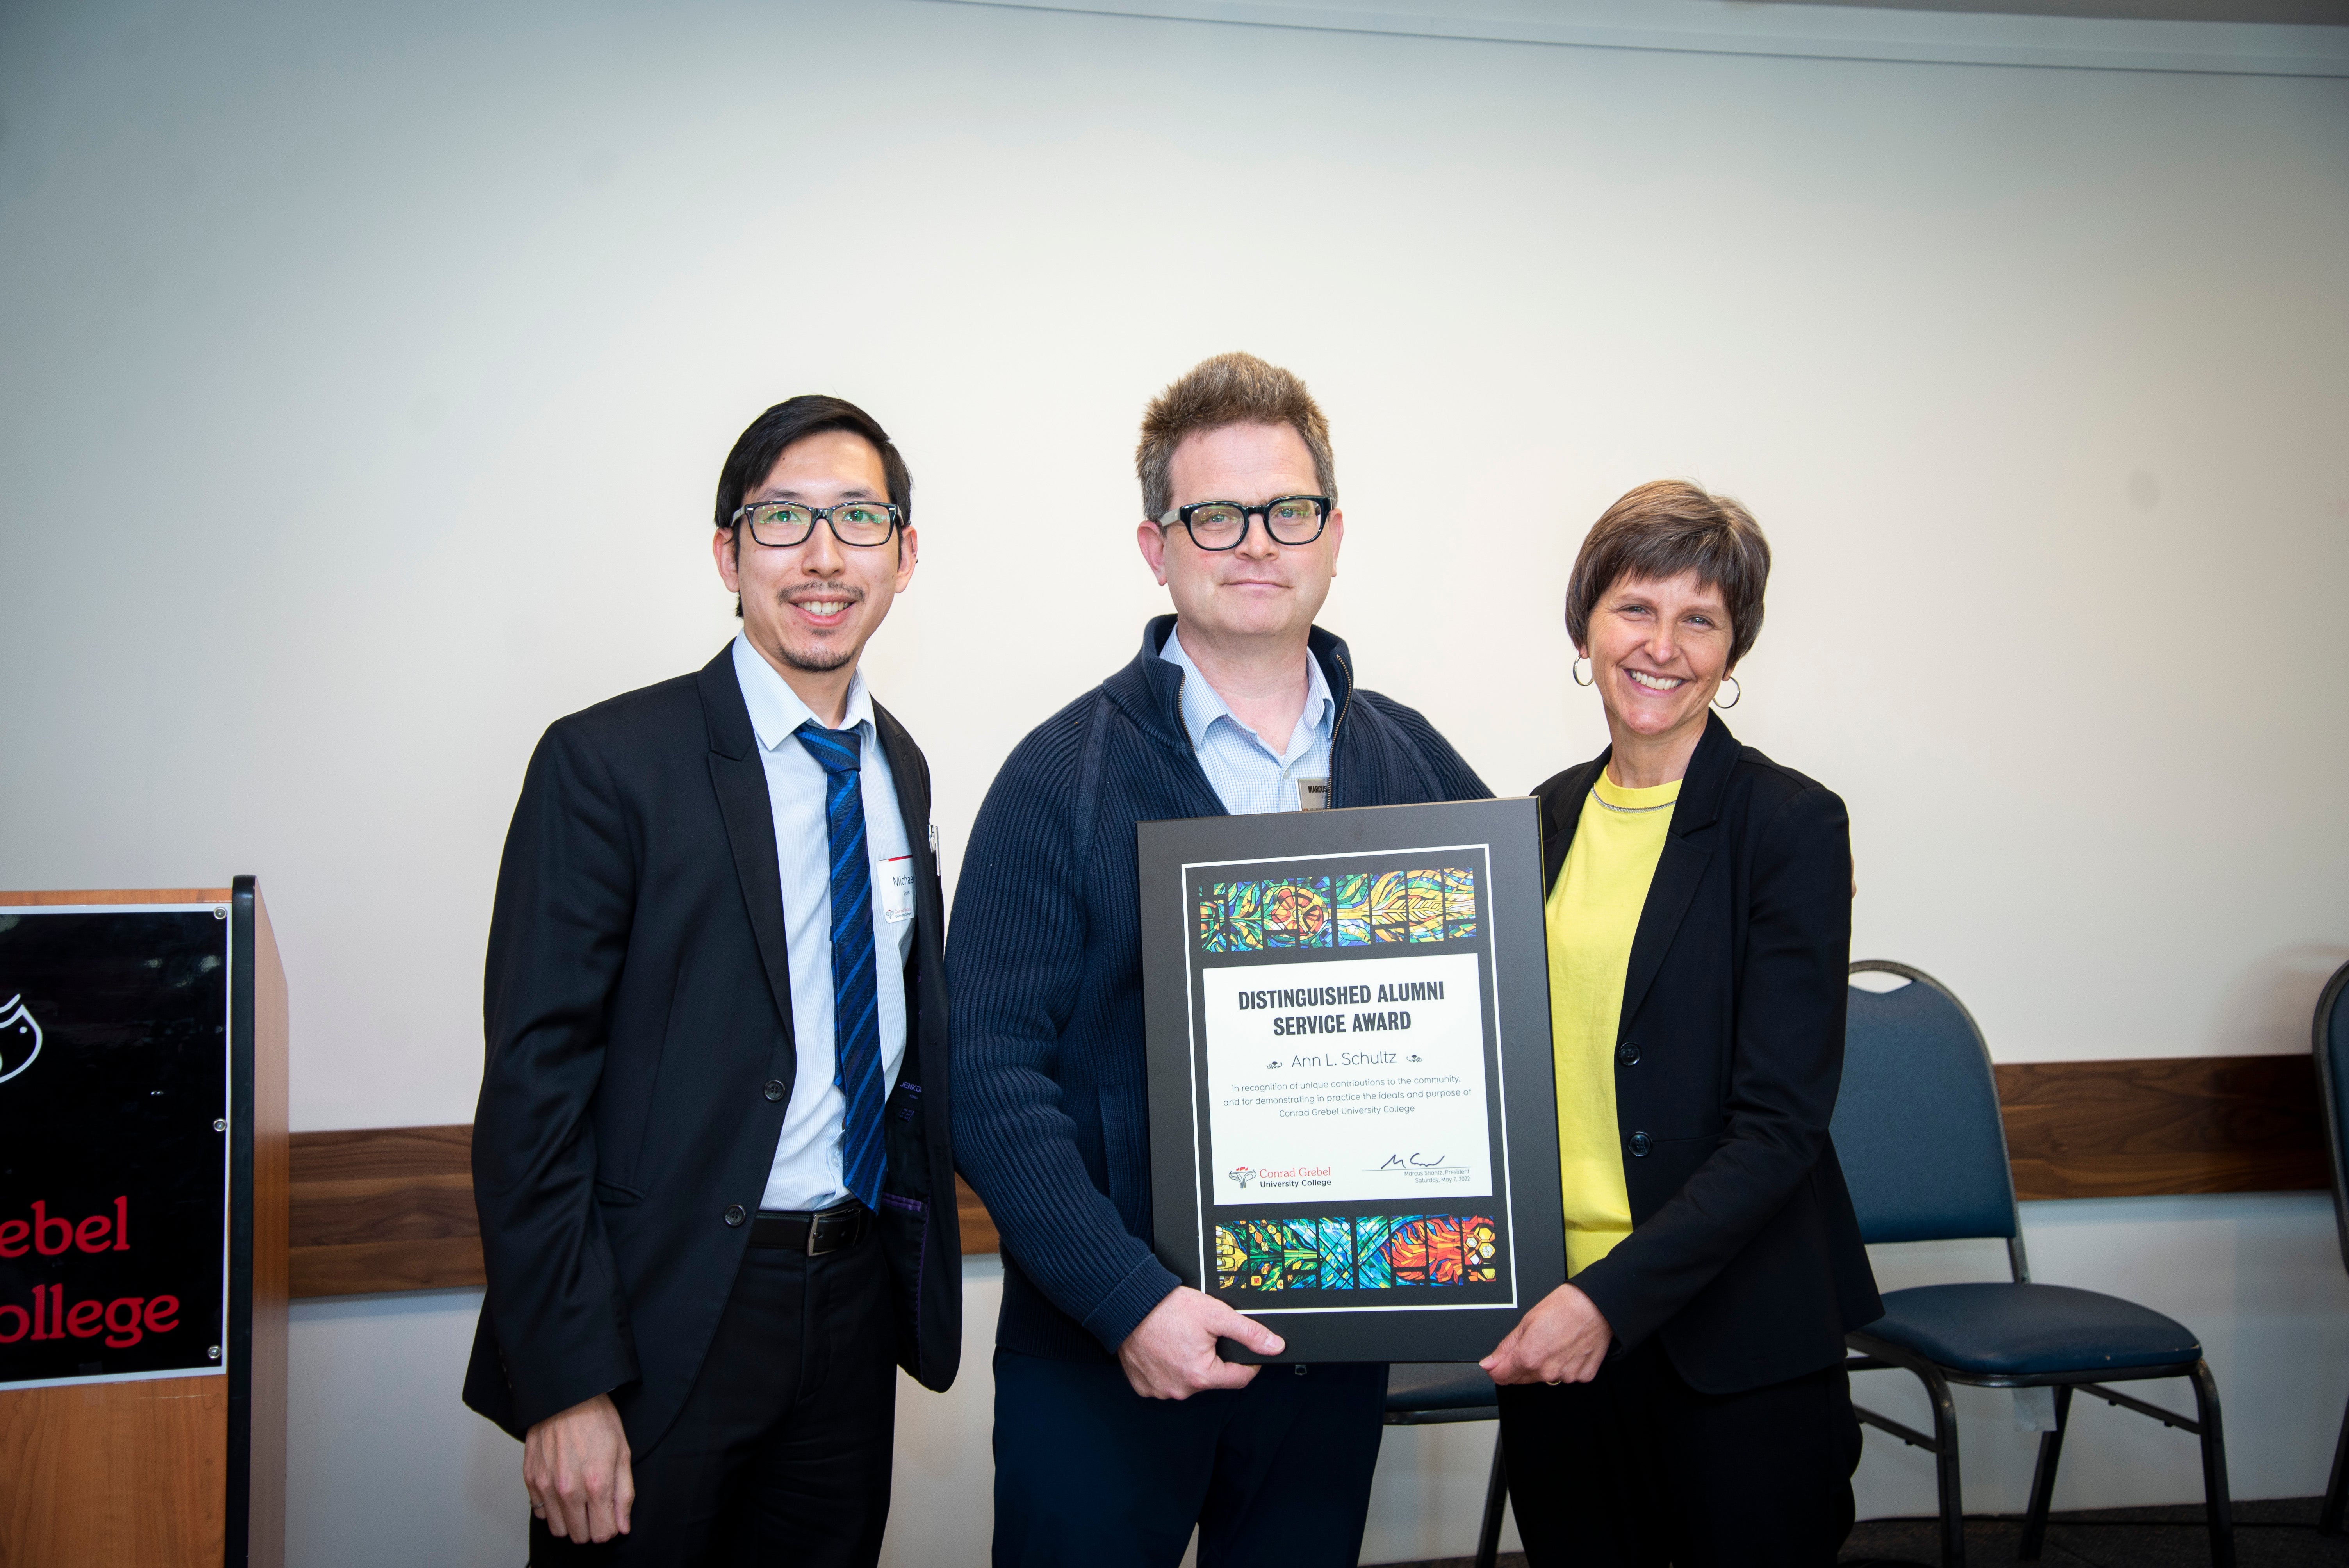 Ann recieves the distinguished alumni award plaque from President Marcus Shantz and Micheal Shum, Alumni board rep.